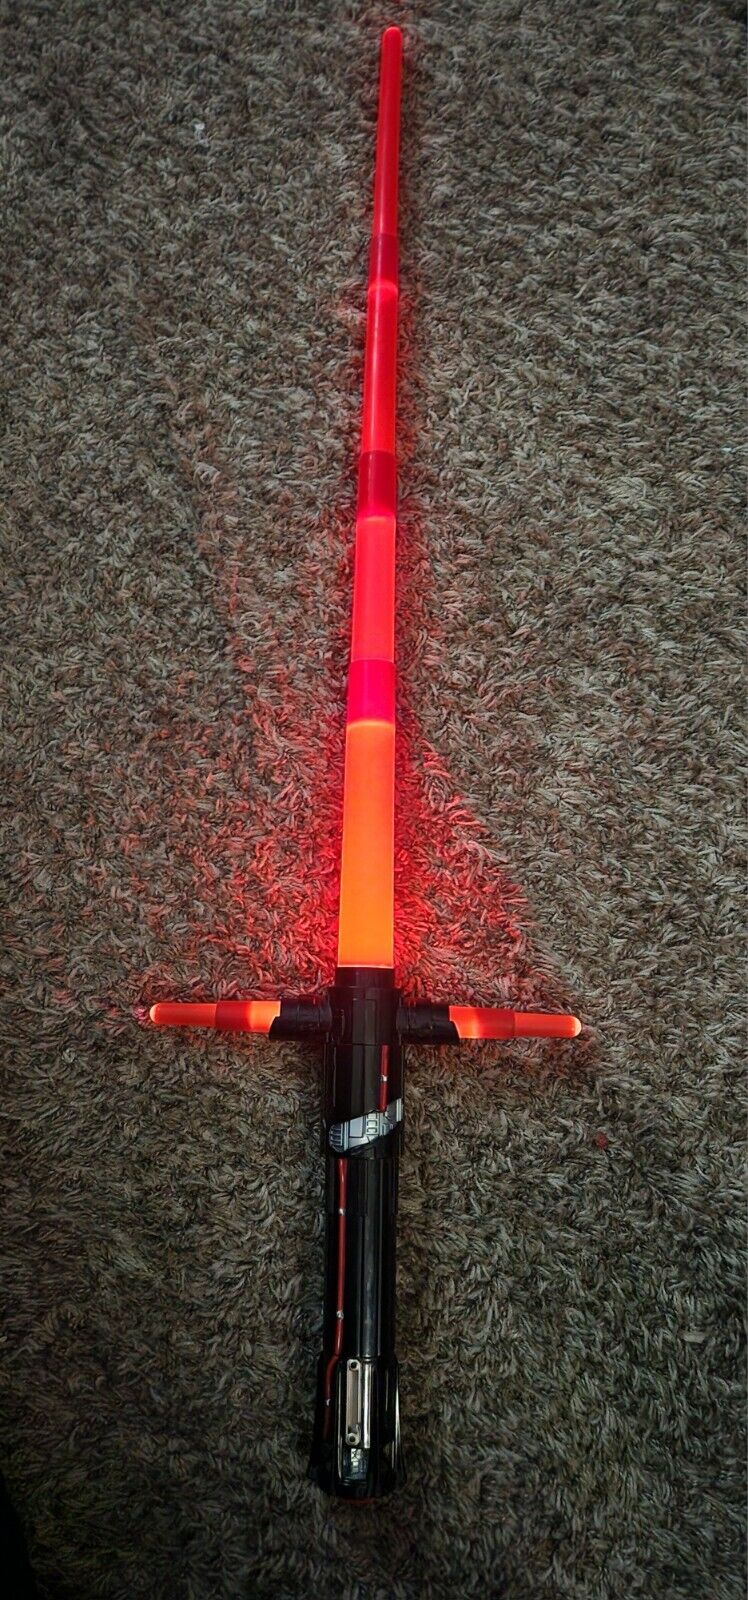 Star Wars The Force Awakens 2015 Hasbro Light Saber Kylo Ren Tested and Working